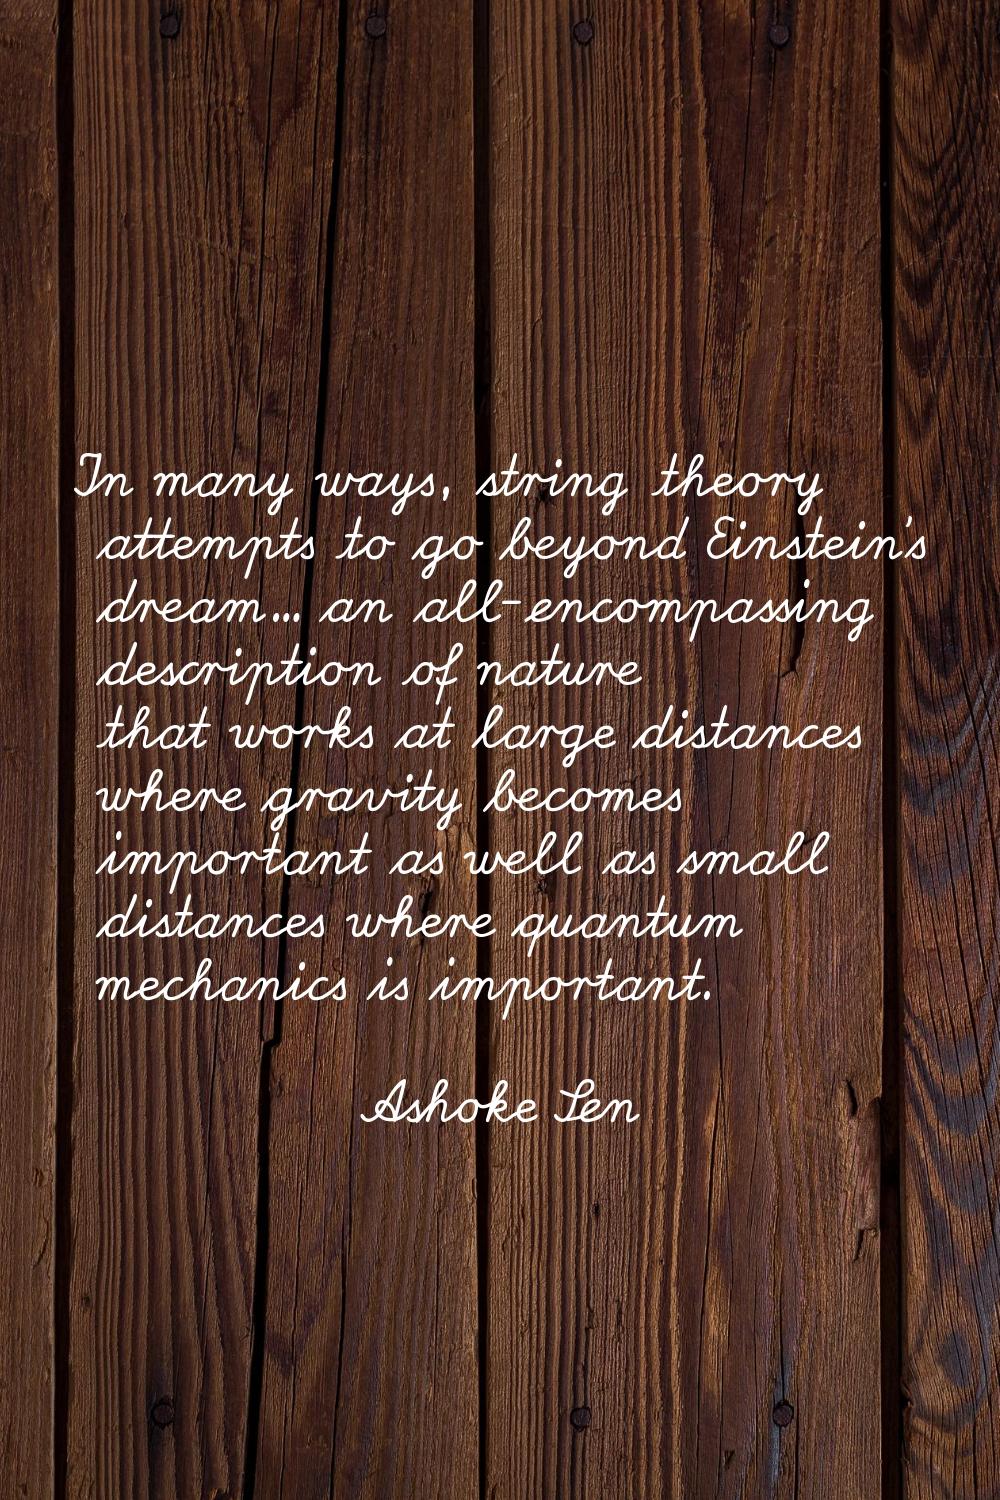 In many ways, string theory attempts to go beyond Einstein's dream... an all-encompassing descripti